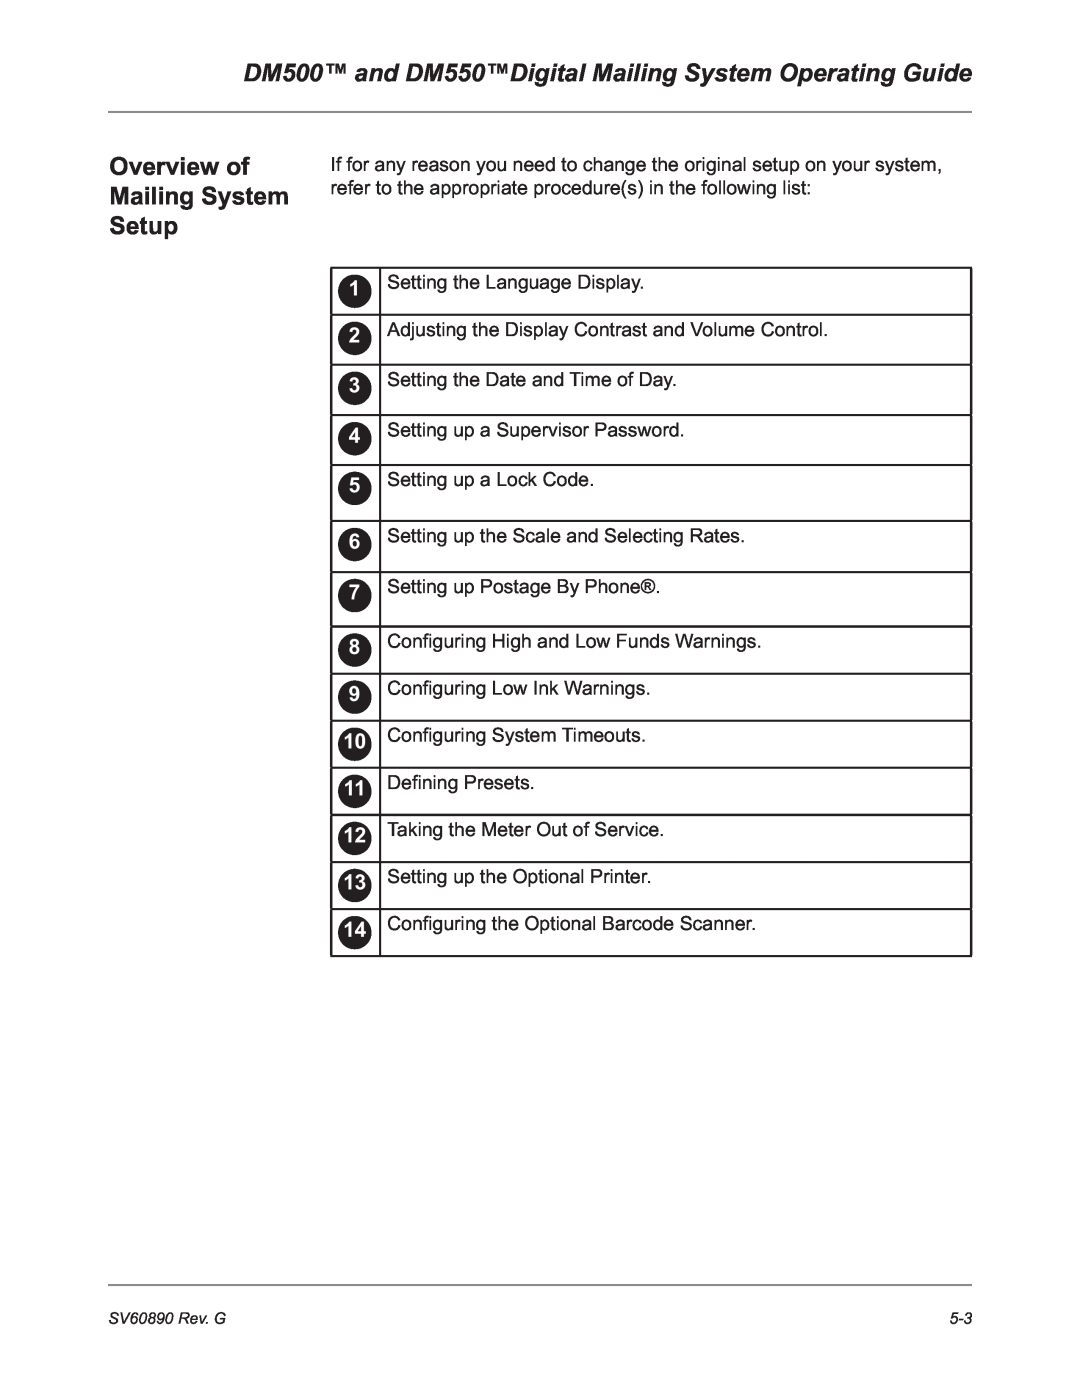 Pitney Bowes manual DM500 and DM550Digital Mailing System Operating Guide, Overview of Mailing System Setup 